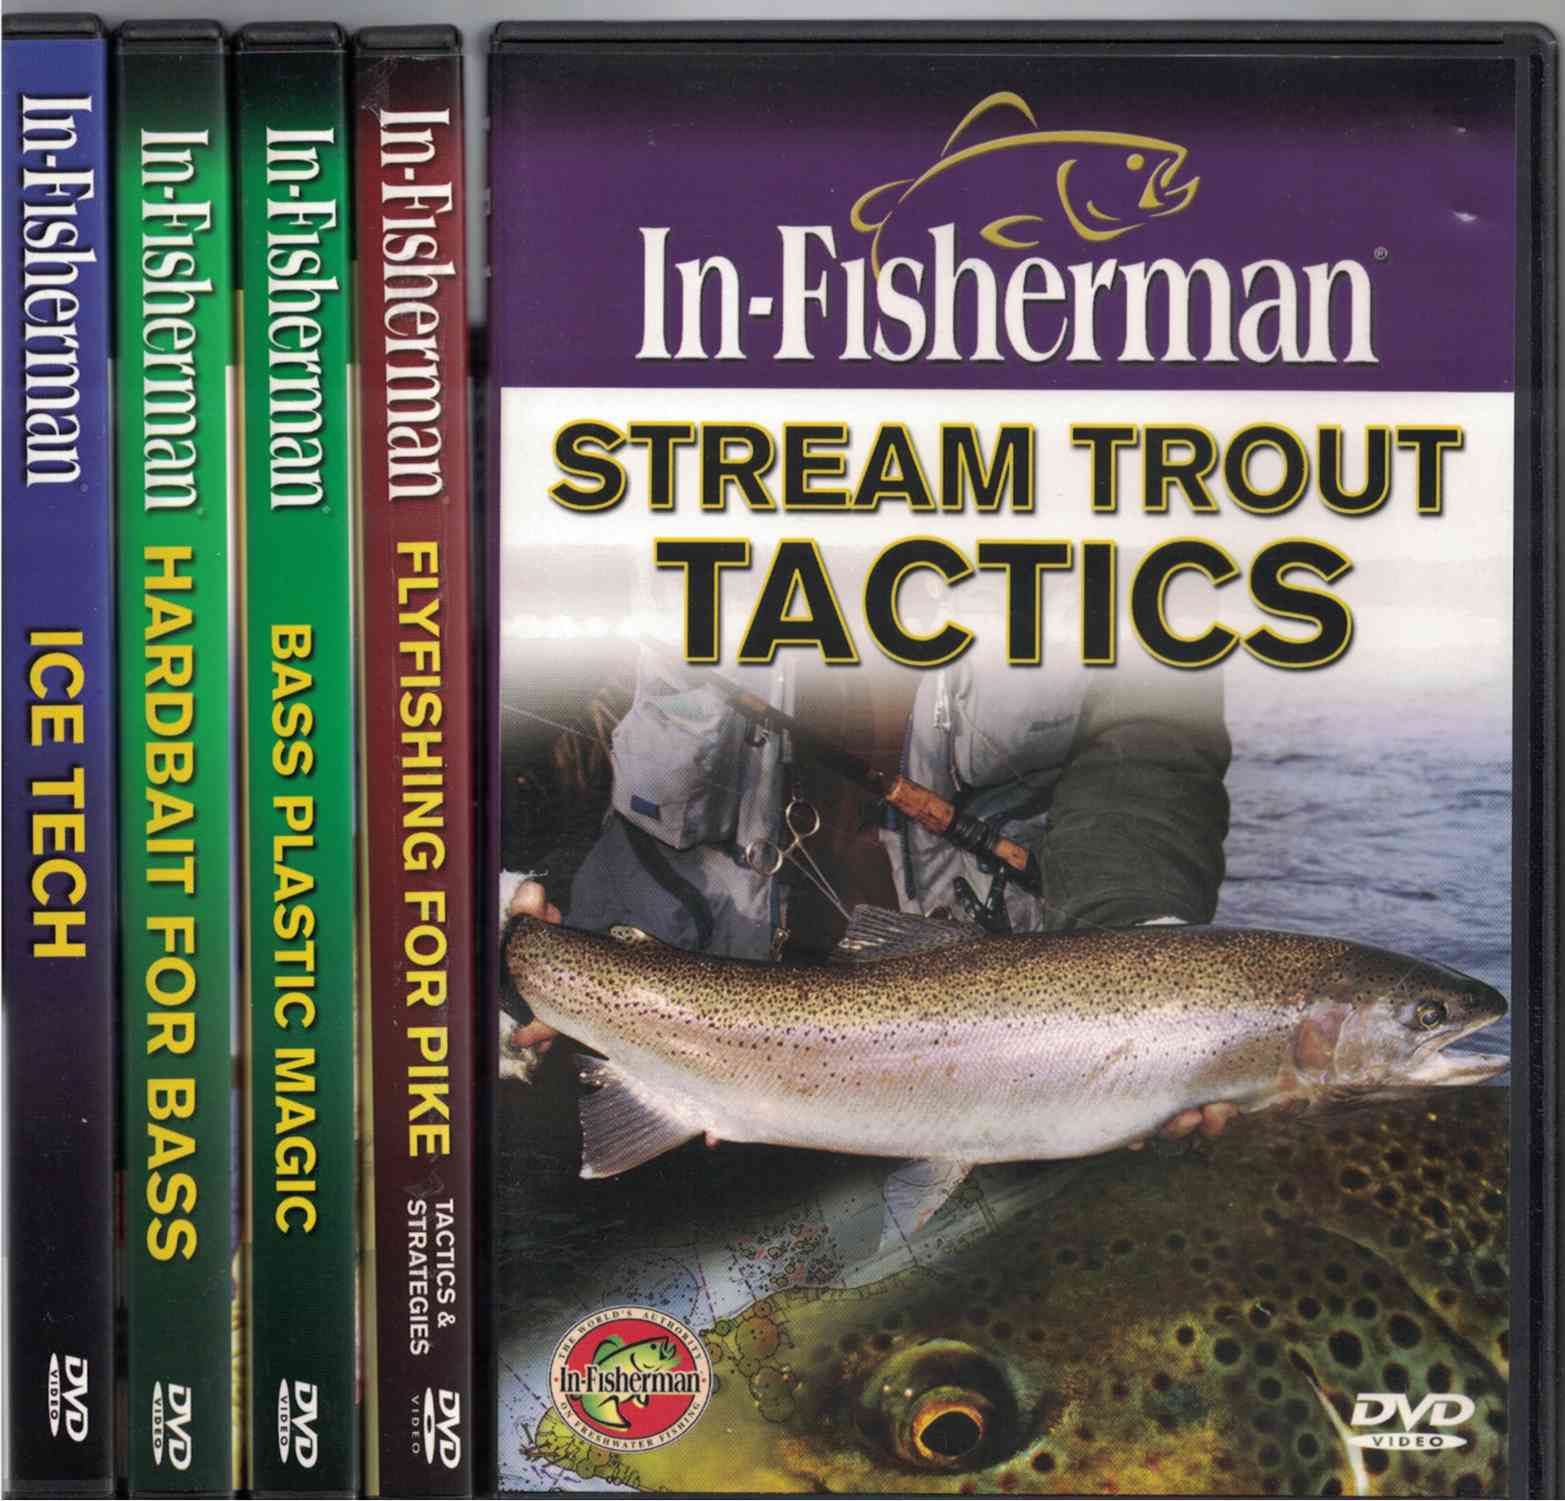 Lot of 5 DVDs] - Includes: Stream Trout Tactics; Flyfishing for Pike;  Bass Plastic Magic; Hardbait for Bass; & Ice Tech by In-Fisherman: Very  Good DVD